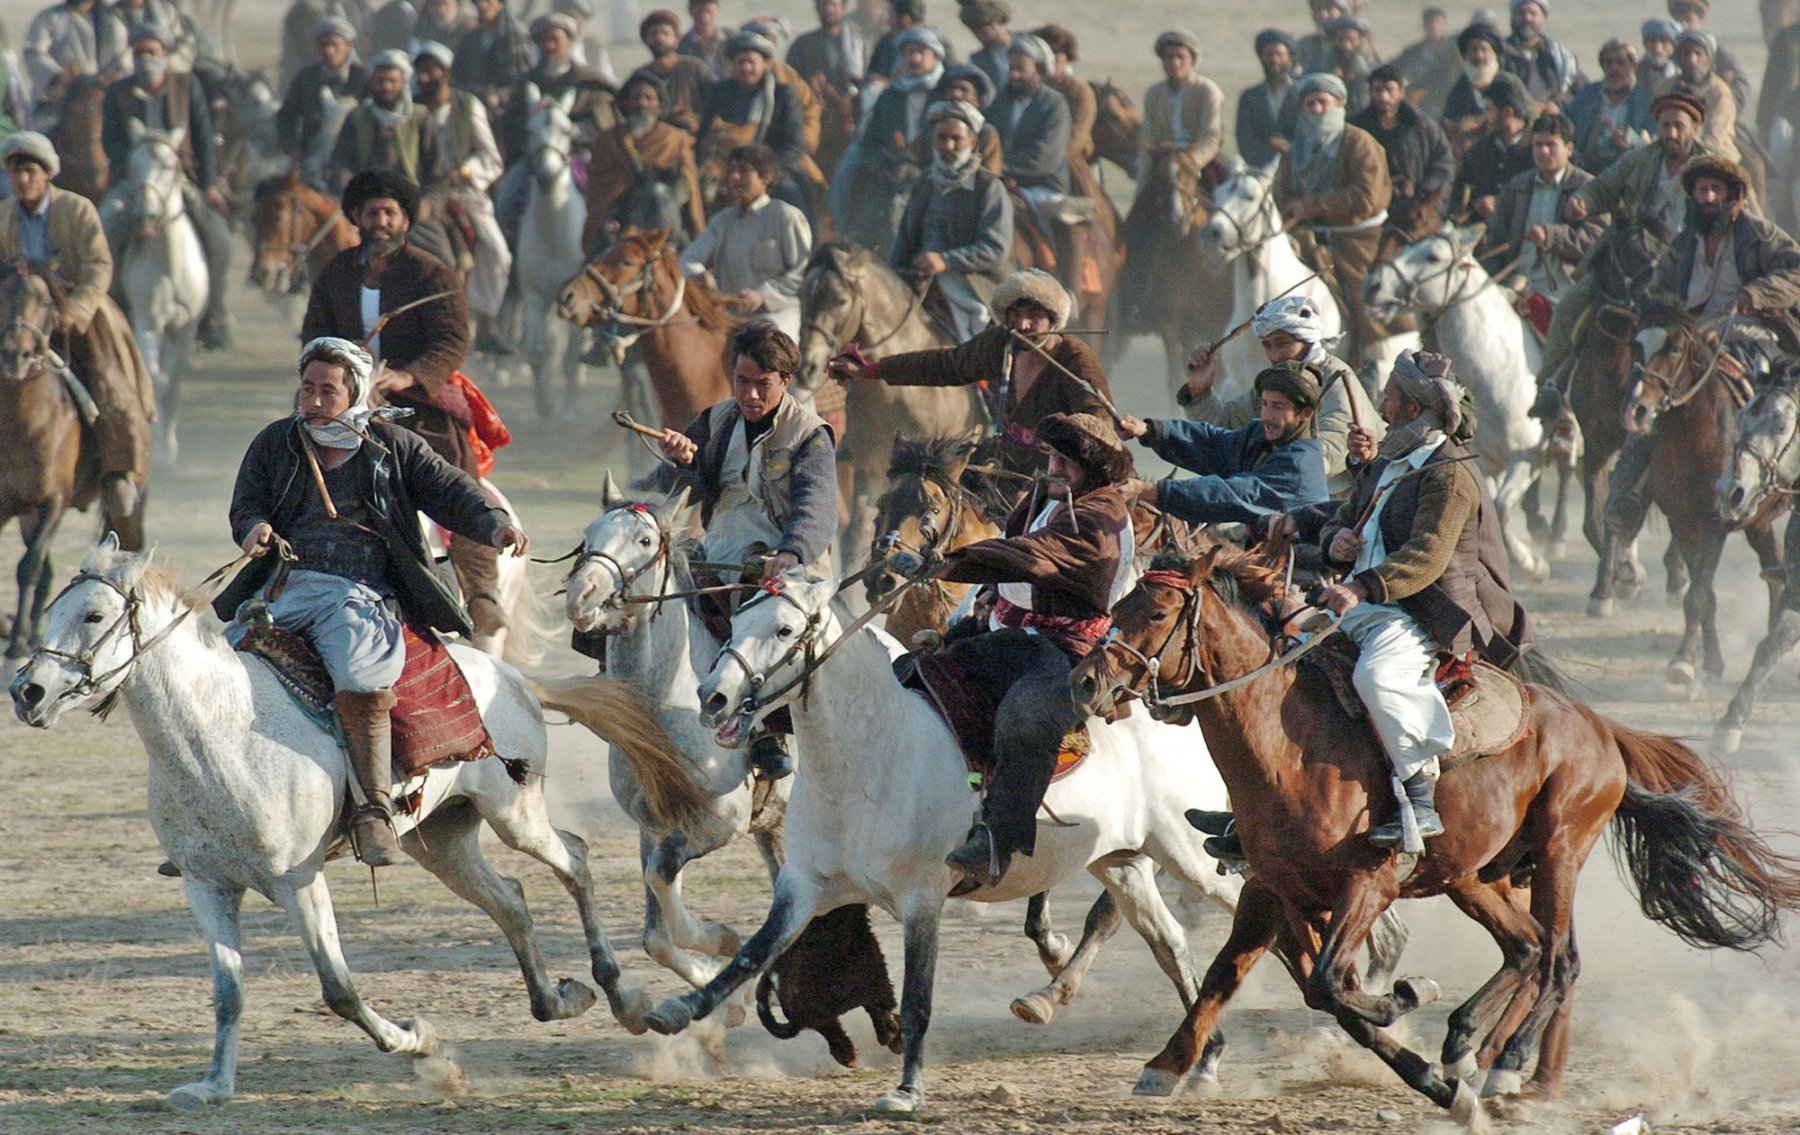 Afghan horsemen chase the player who grabbed the goat during the traditional Buzkashi game in Kundus, Afghanistan. The carcass of an animal, preferably goats, is being prepared 24 hours before the game so it remain intact and not be torn to pieces as hundreds of horsemen independently compete to grab and carry the carcass to the winning circle. To begin the game, a pit is dug and the carcass is placed into it so that the top of the carcass is level with the ground. A large circle is drawn around the pit. The horsemen encircle the pit containing the carcass, and on a given signal, compete to grab it and gallop away around one post and then the other before returning and throwing the boz back into the pit. The other riders try to prevent that by attacking the rider and trying to steal the carcass away. The horseman who returns the carcass into the pit is considered the winner. Photo by Boris Roessler/dpa